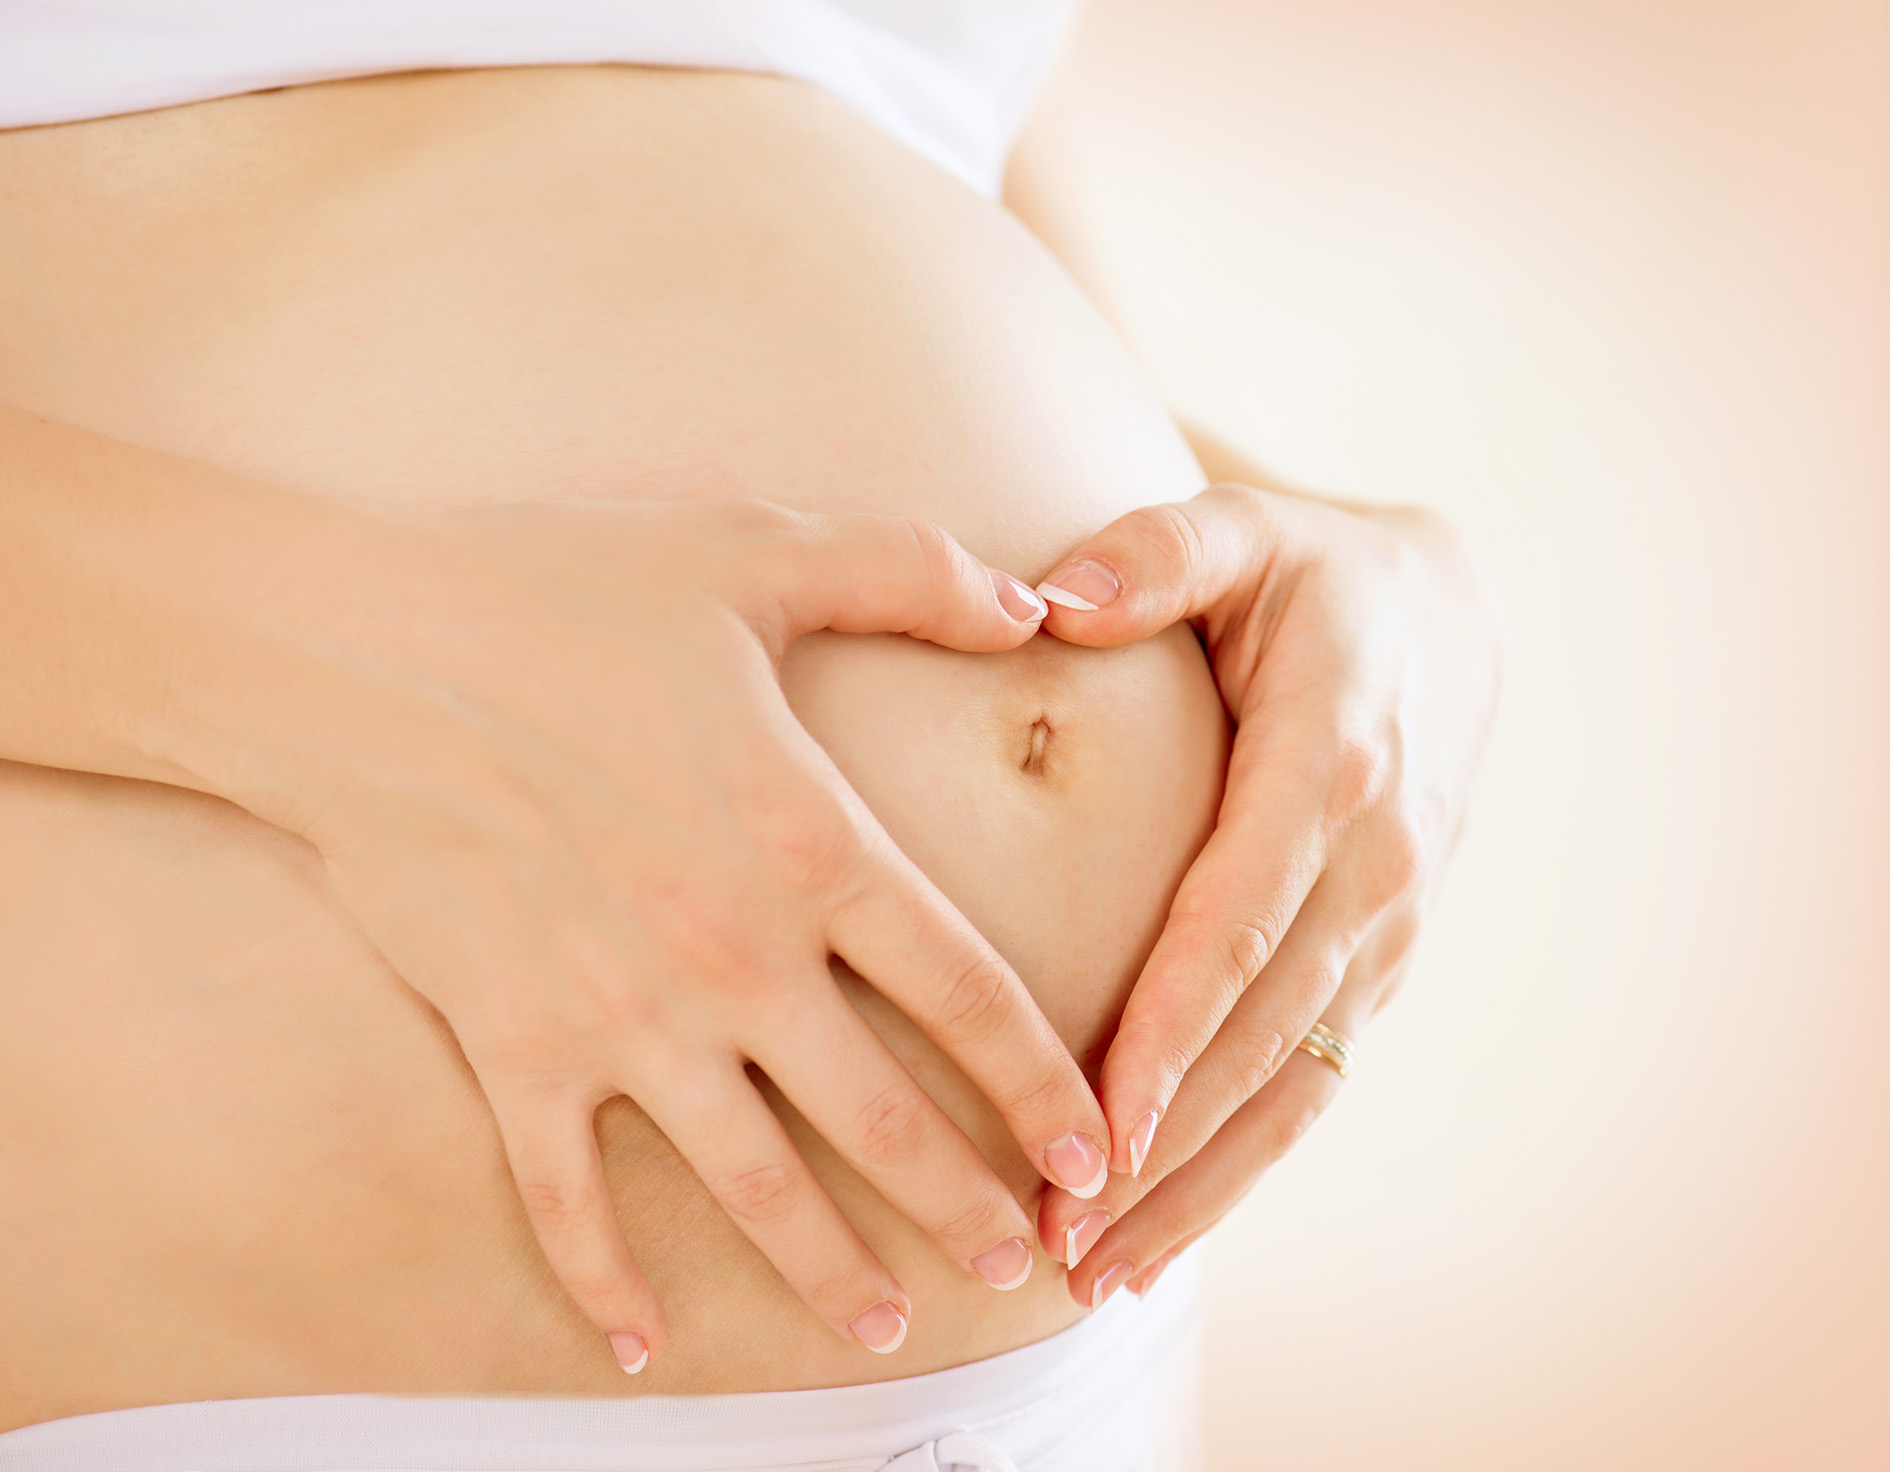 Industry academia partnership aims to make pregnancy safer